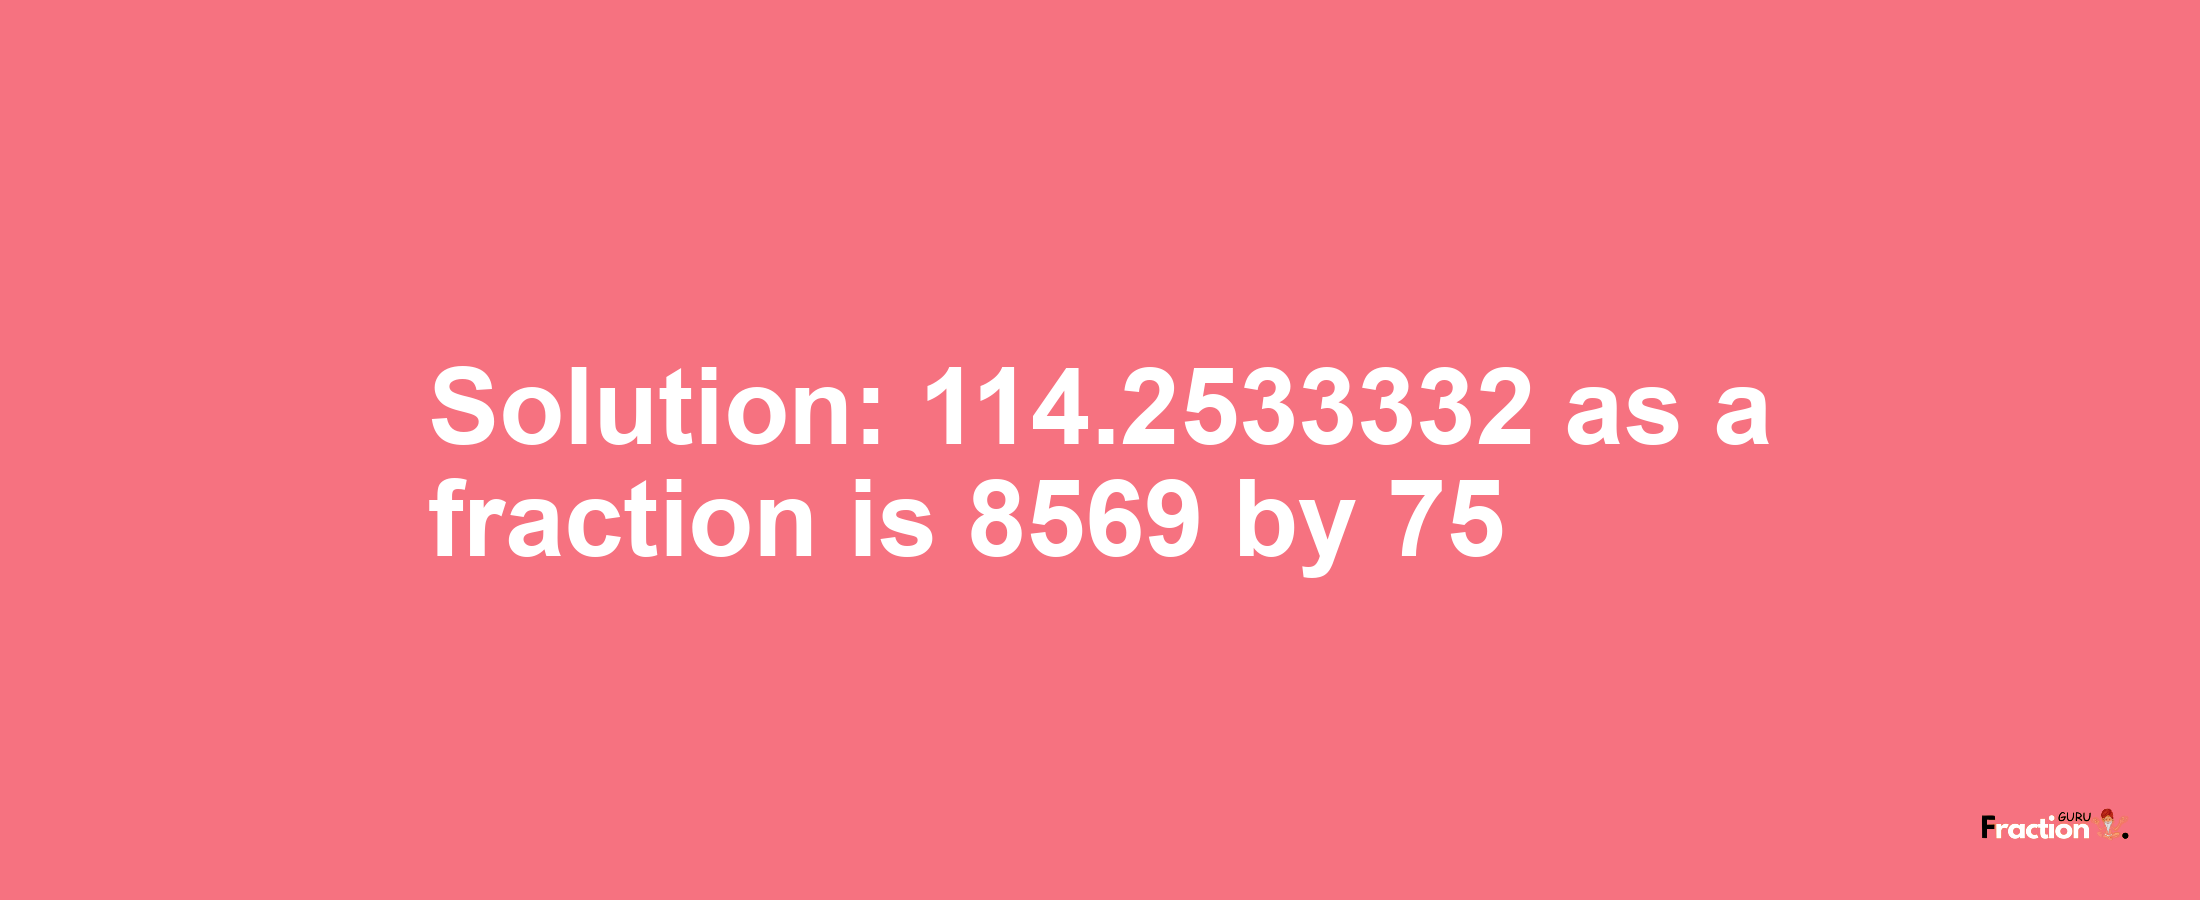 Solution:114.2533332 as a fraction is 8569/75